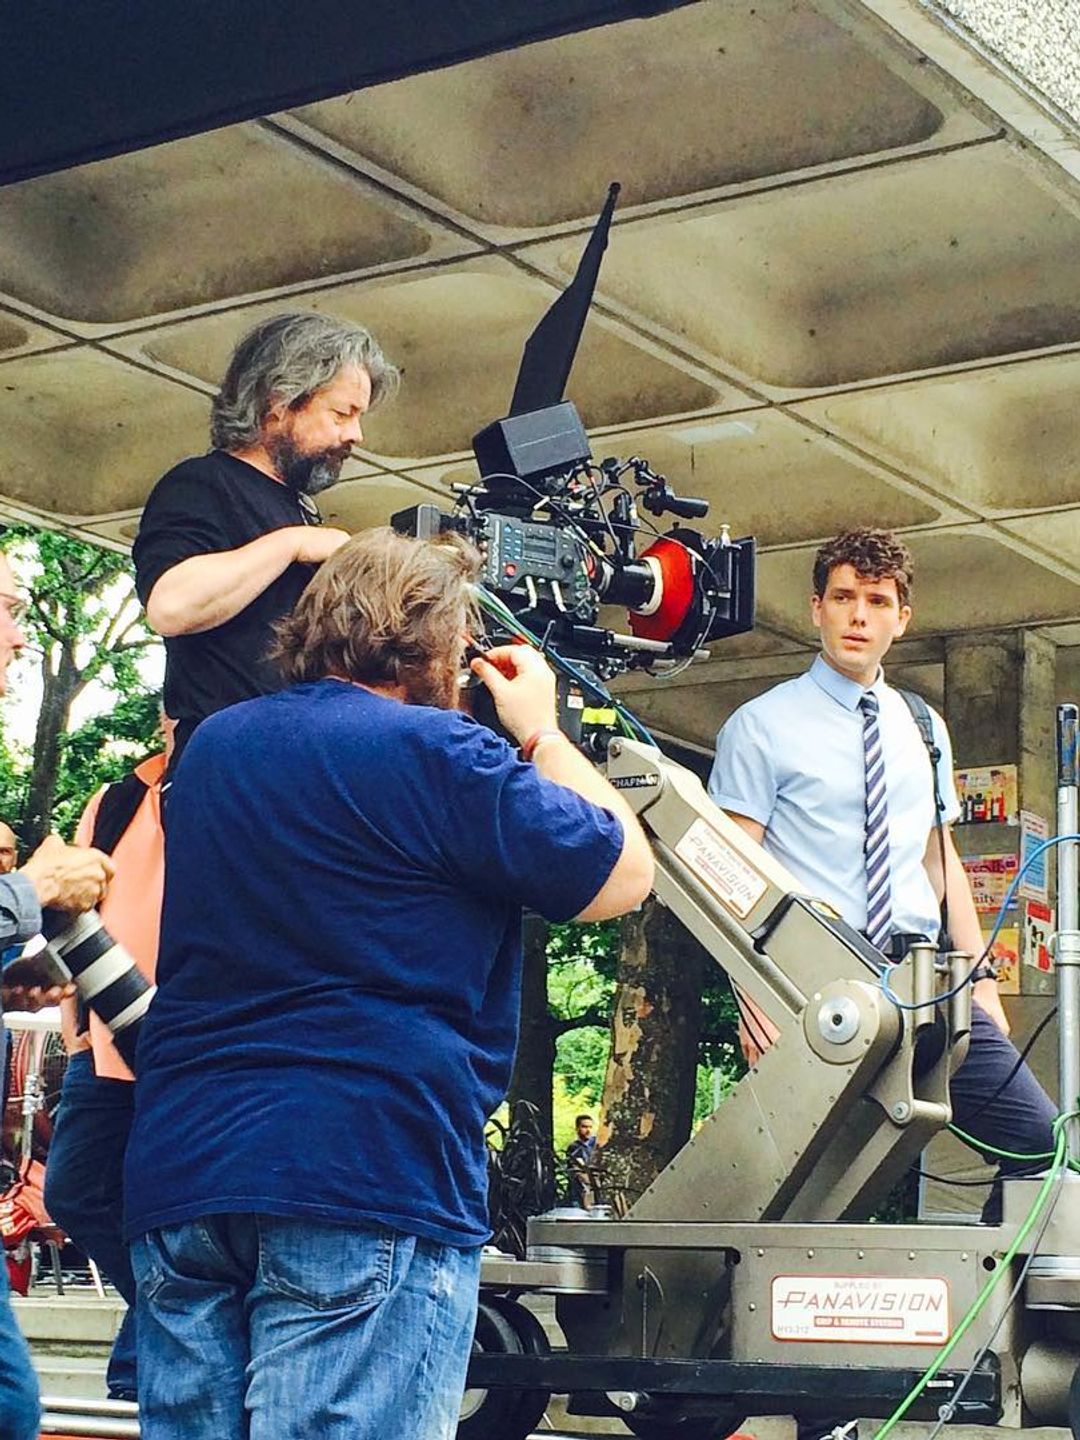 Austin next to the camera team on the set of his first movie